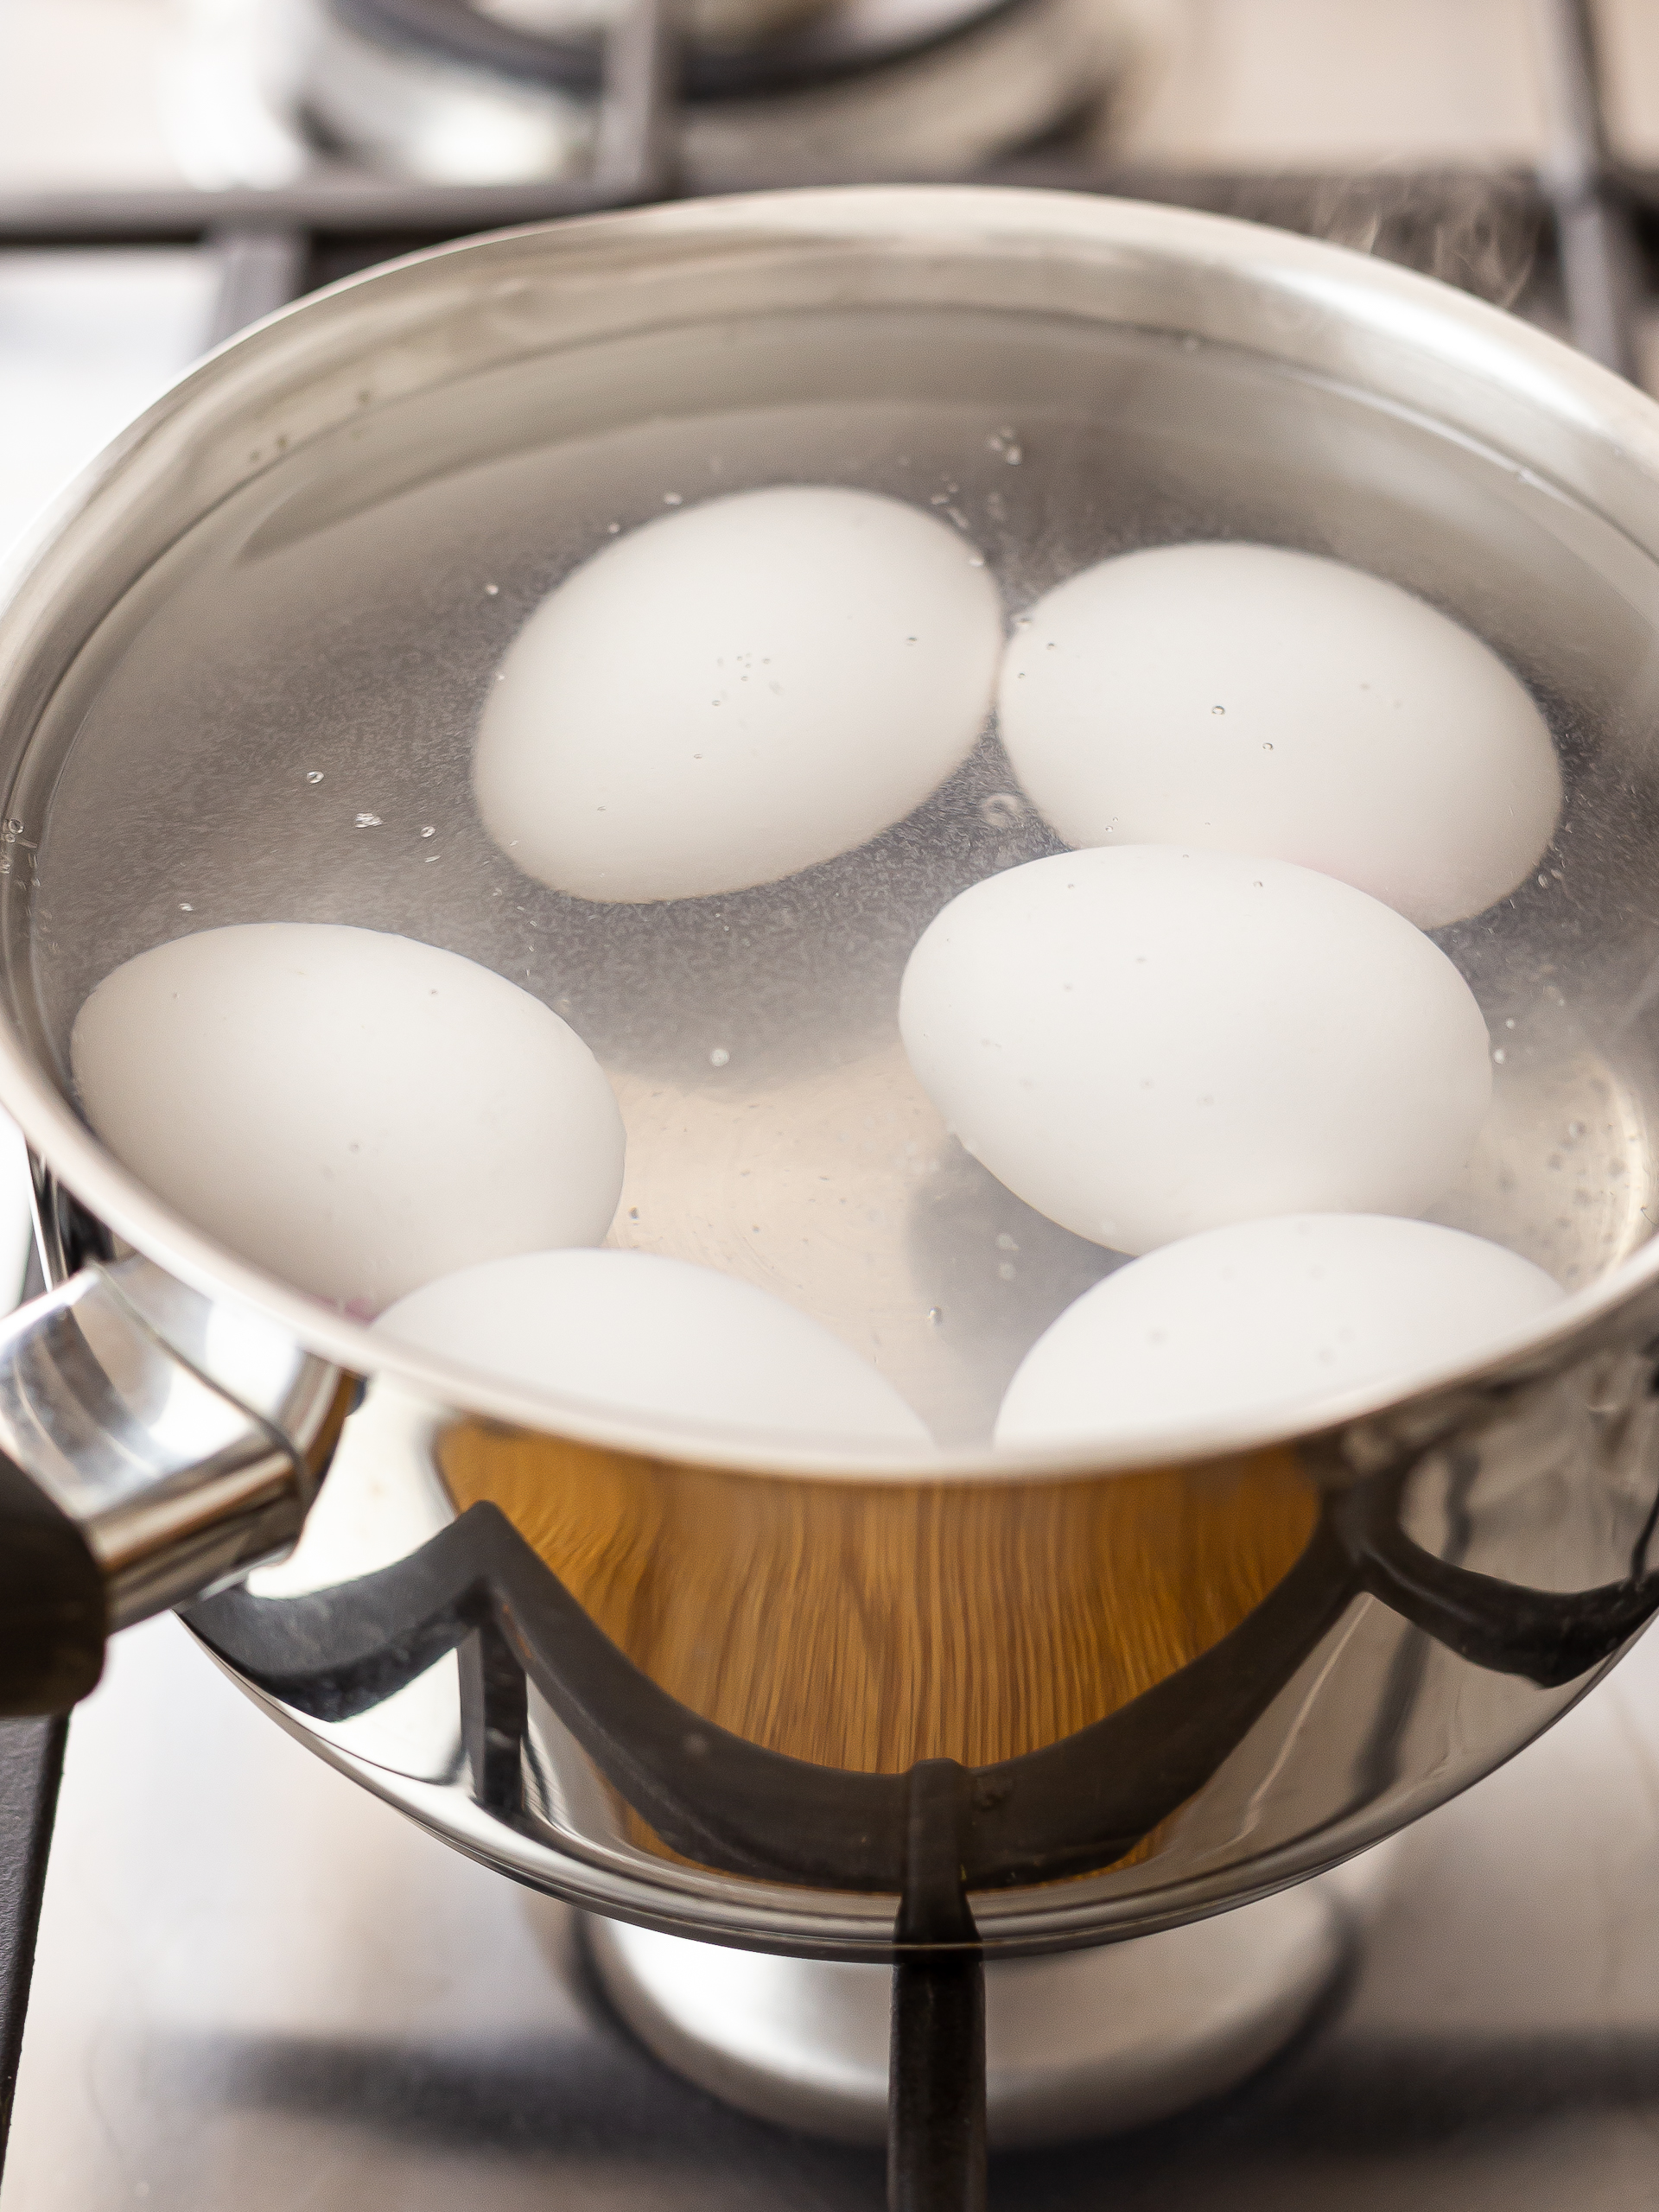 boiled eggs in a pot of water